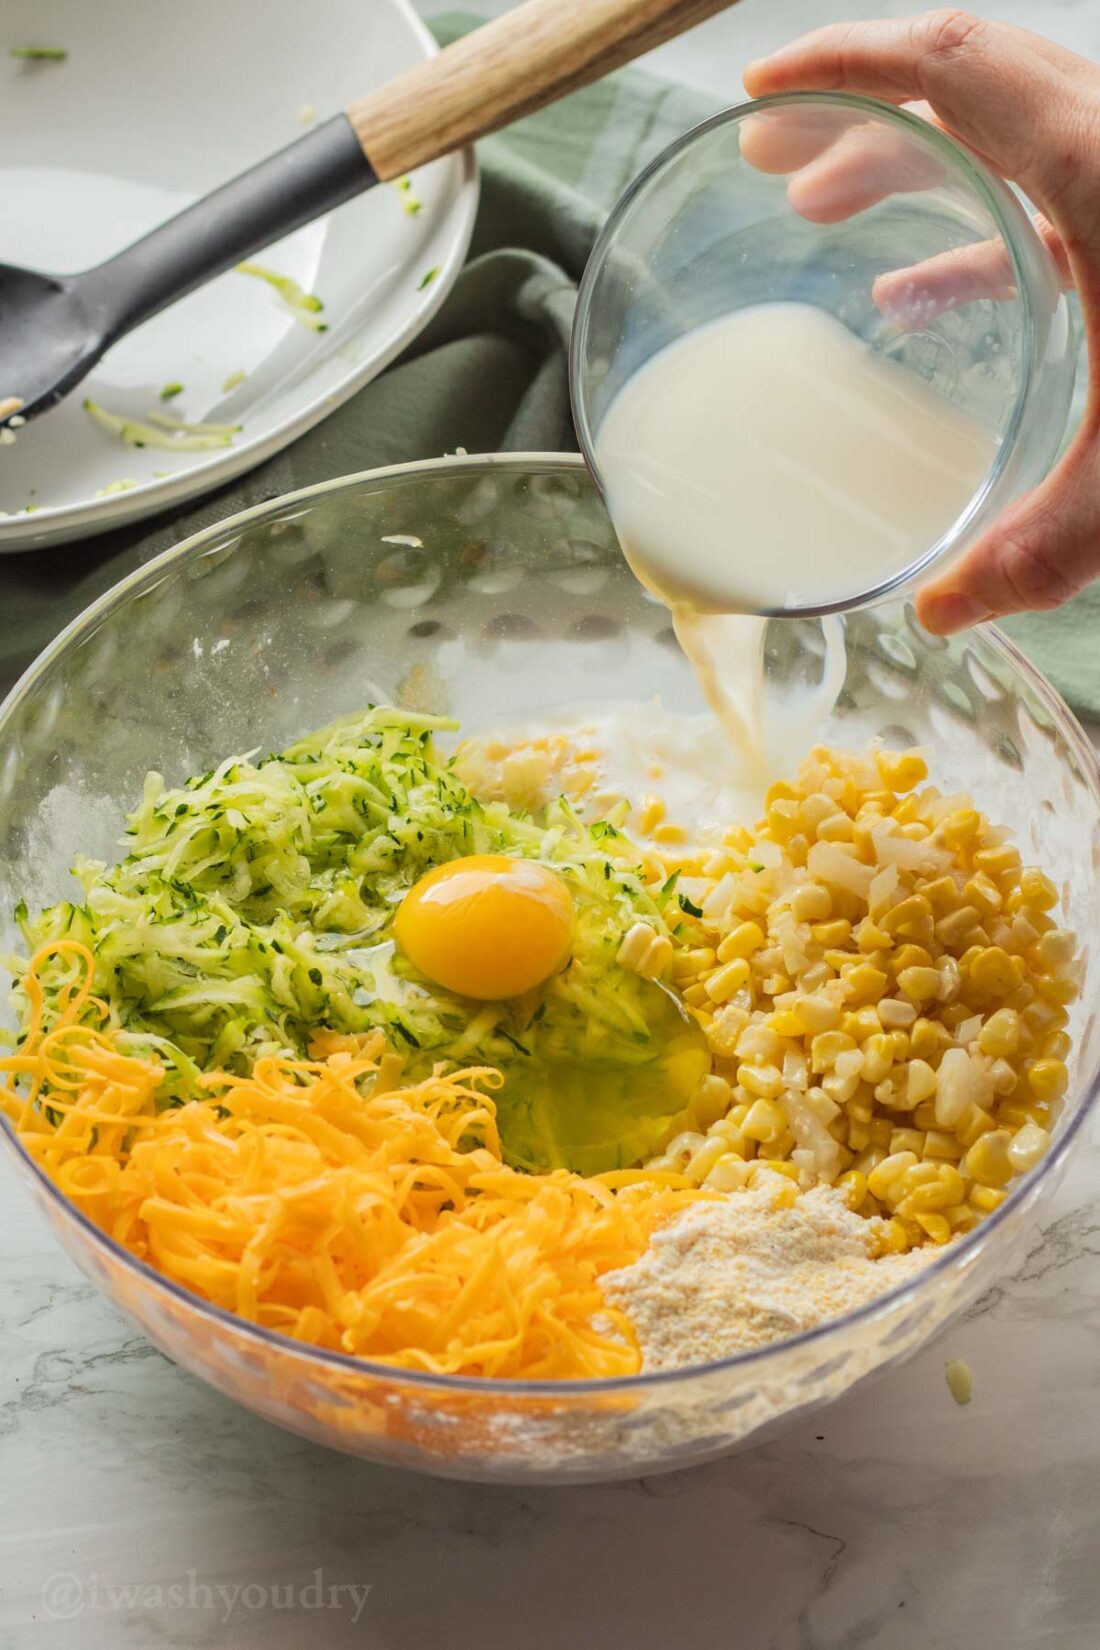 Pour the milk and egg into a bowl of cheese, zucchini, corn, onion, flour, cornmeal and spices. 